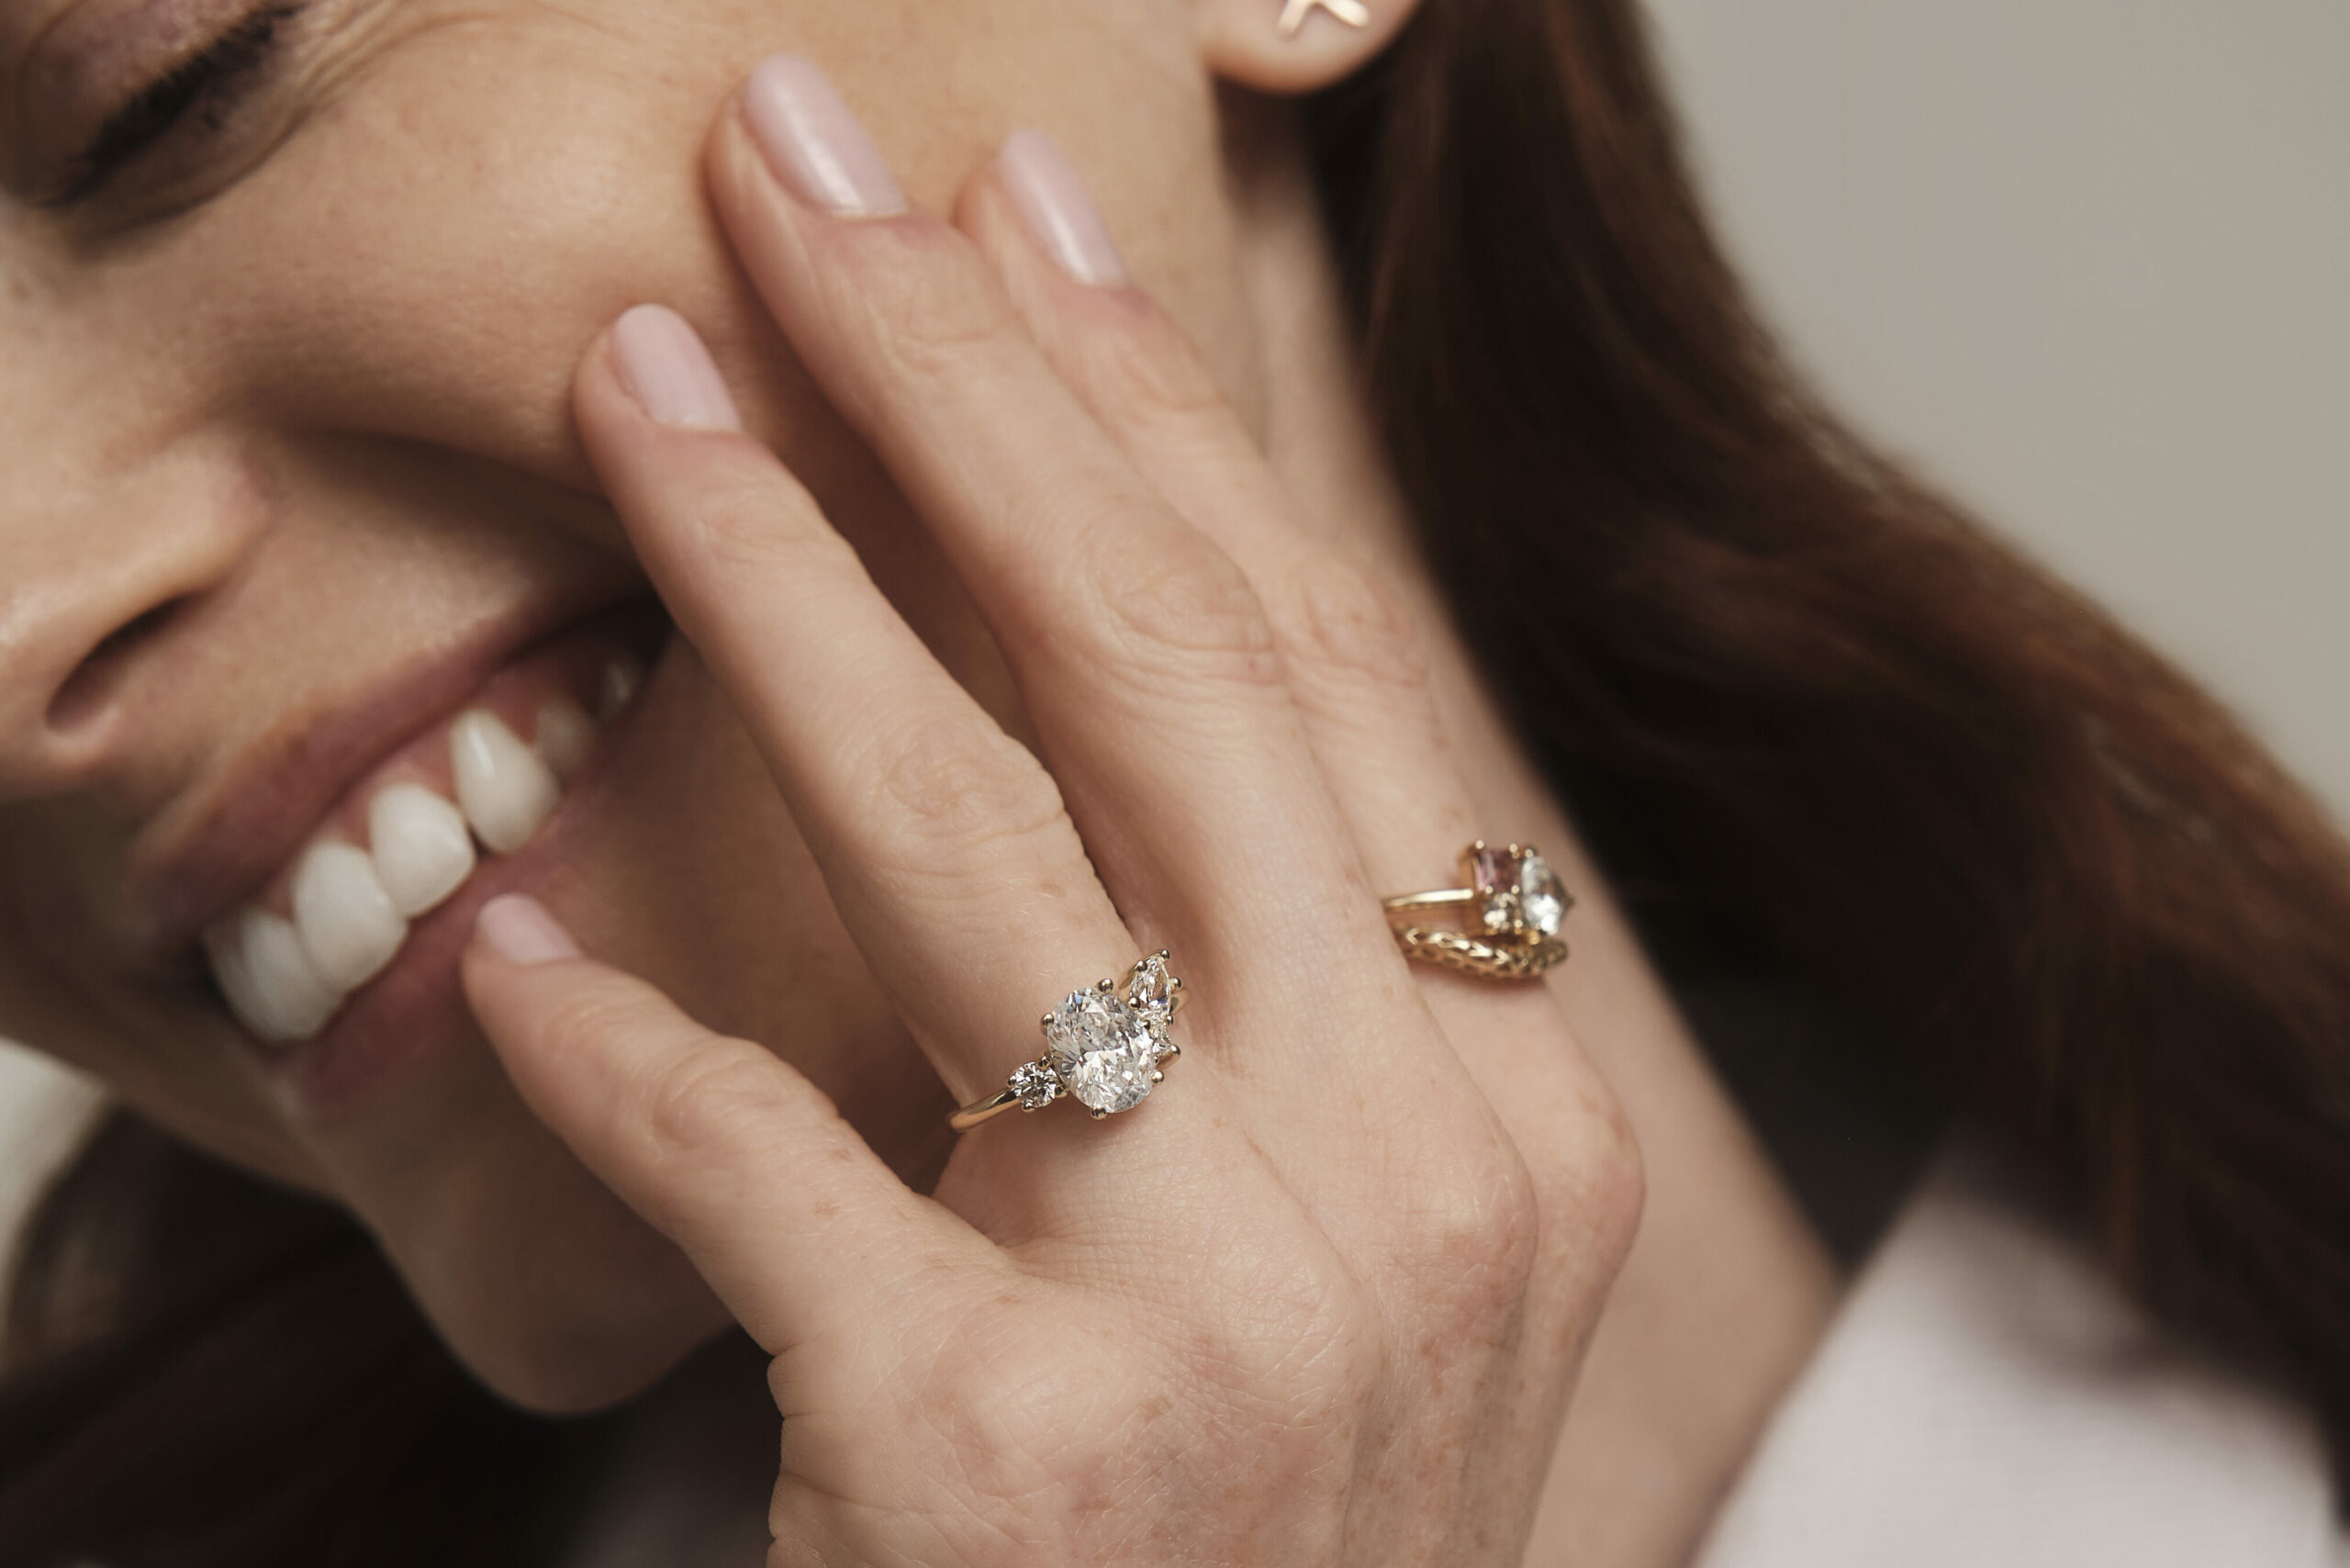 Hand placed gently on model's cheek. Pointer finger wearing Eaves Cluster ring, ring finger wearing a filagree and Charta cluster stack. Model smiling, hand in focus